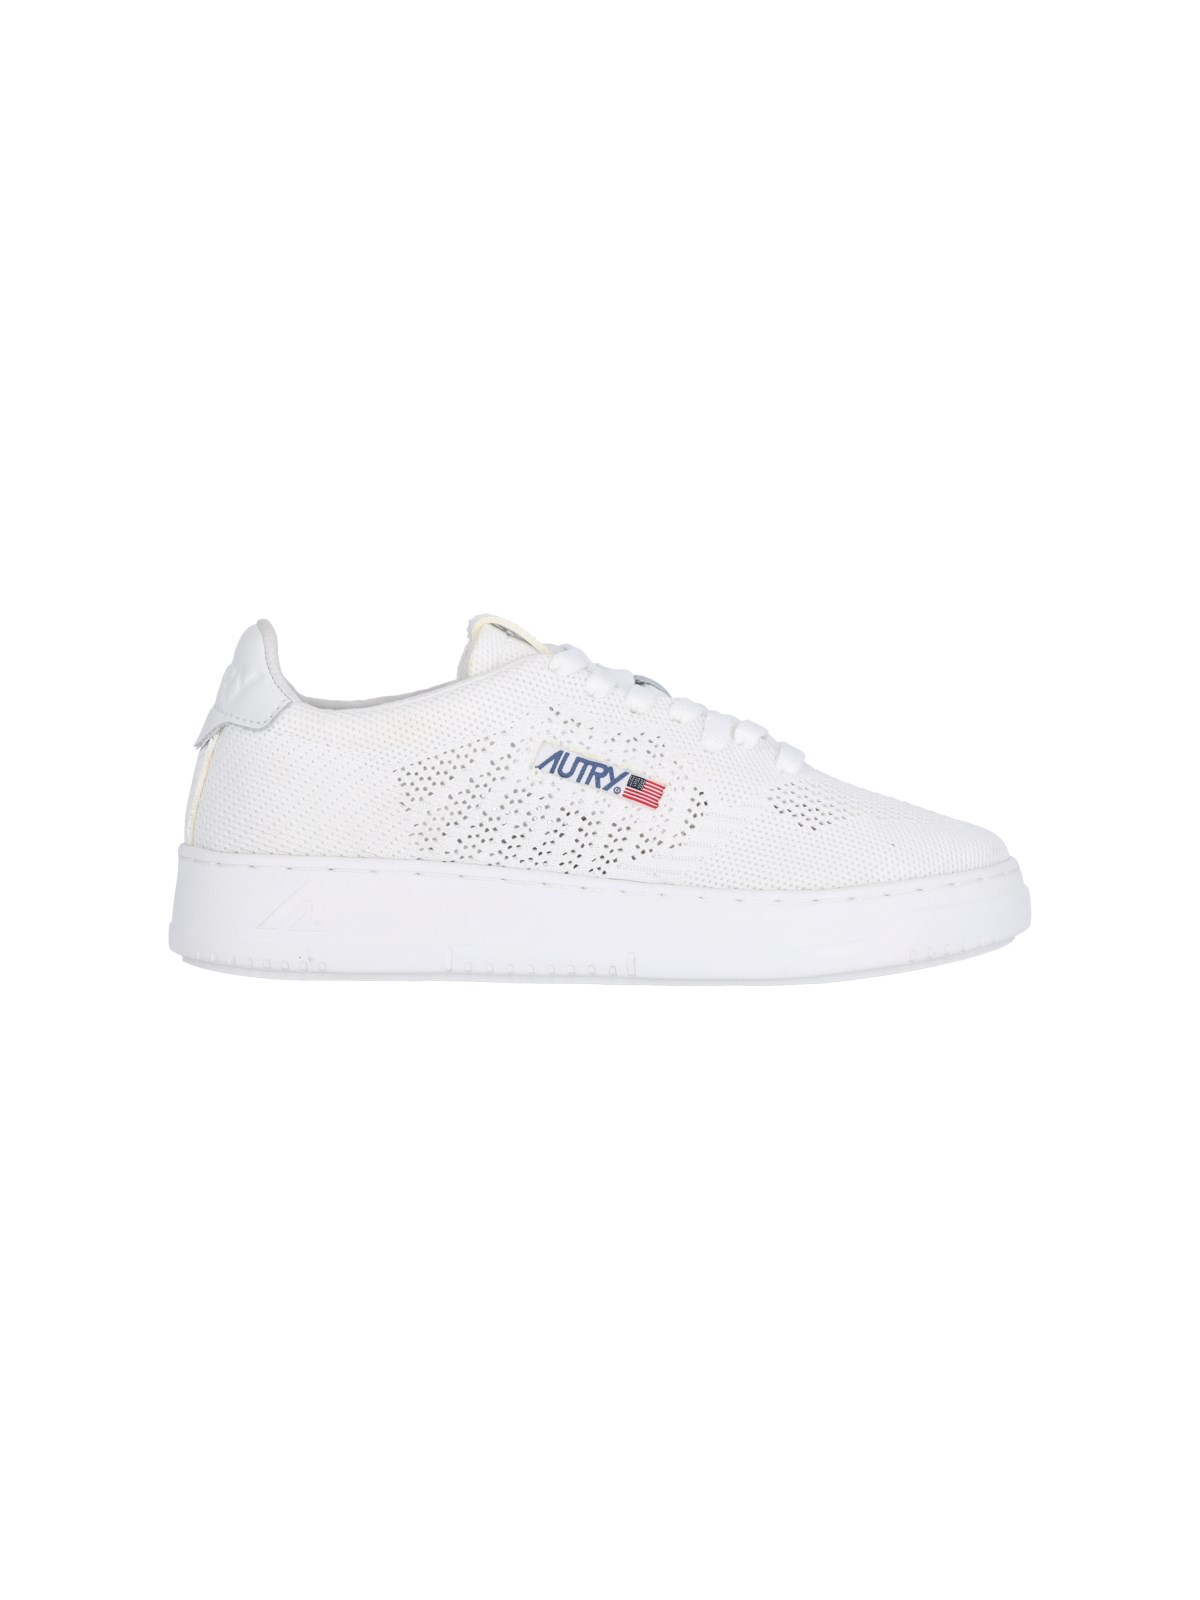 Shop Autry "medalist Easeknit Low" Sneakers In White